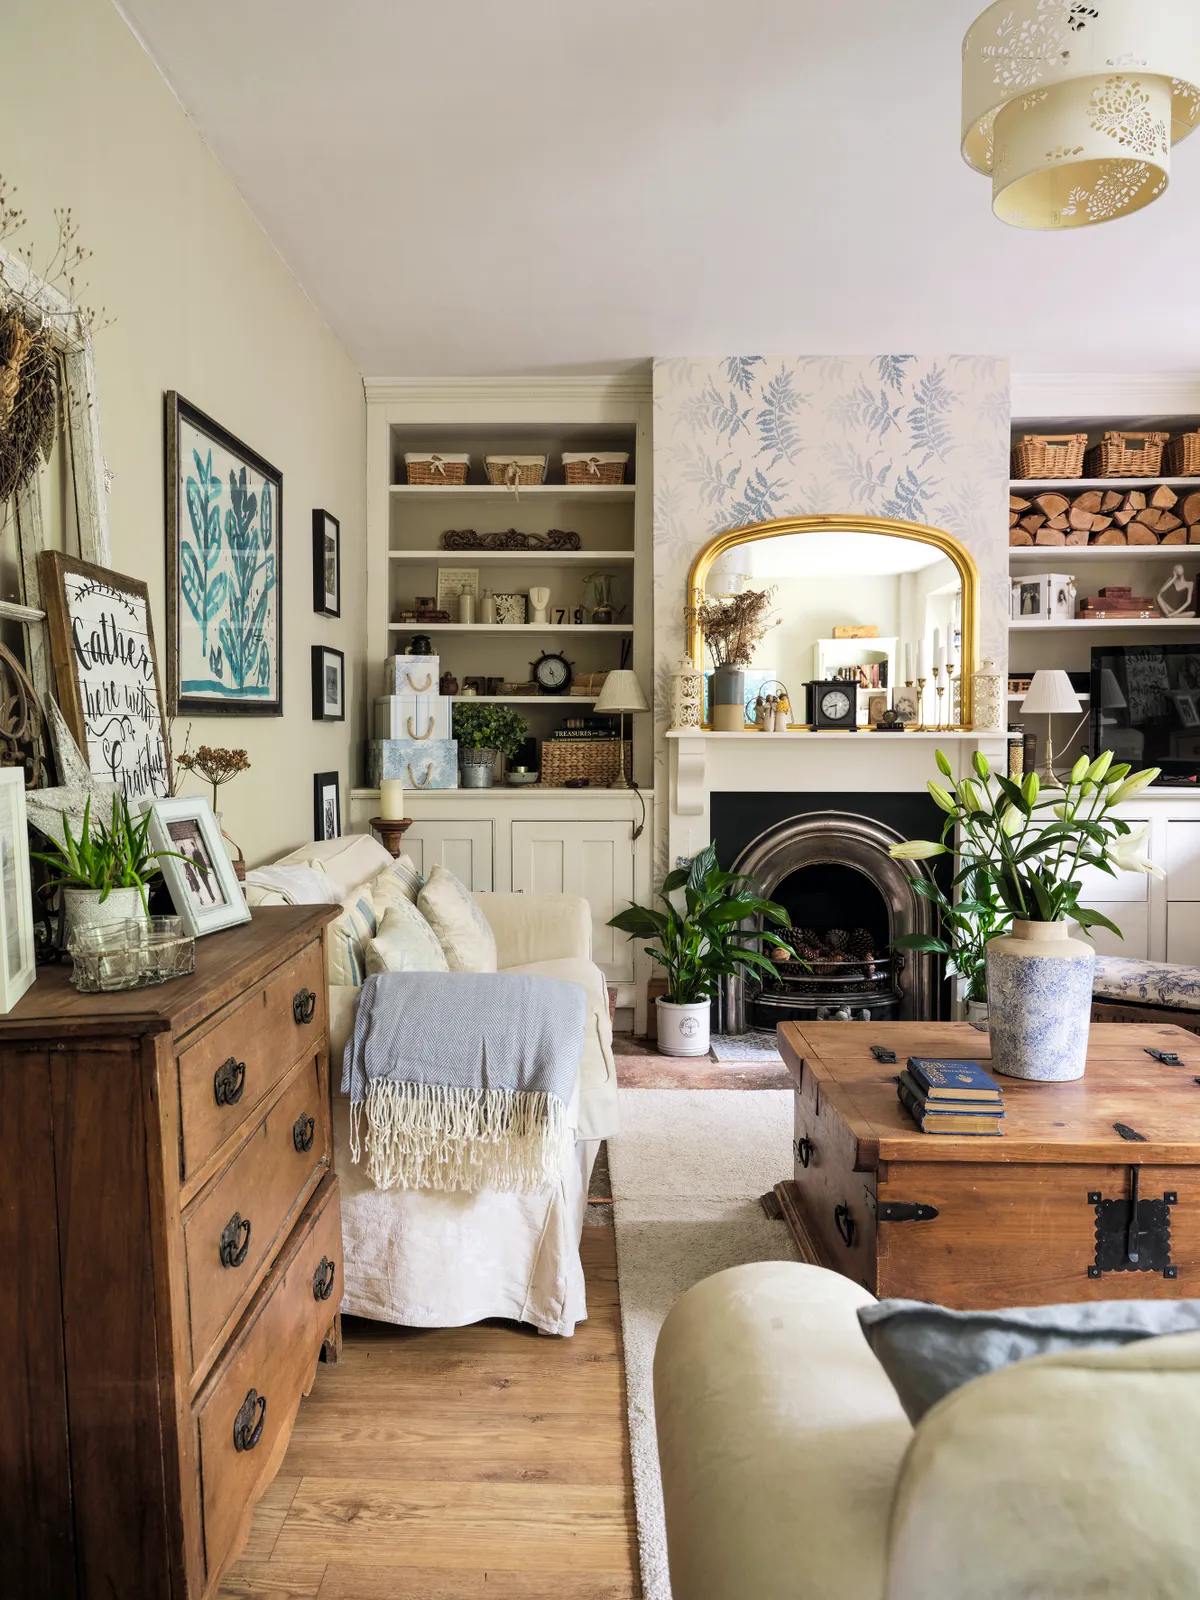 Originally two rooms, the lounge is now one big family space filled with traditional charm. ‘We also reinstated the fireplace and painted the orange pine woodwork to create a more restful feel,’ says Ali